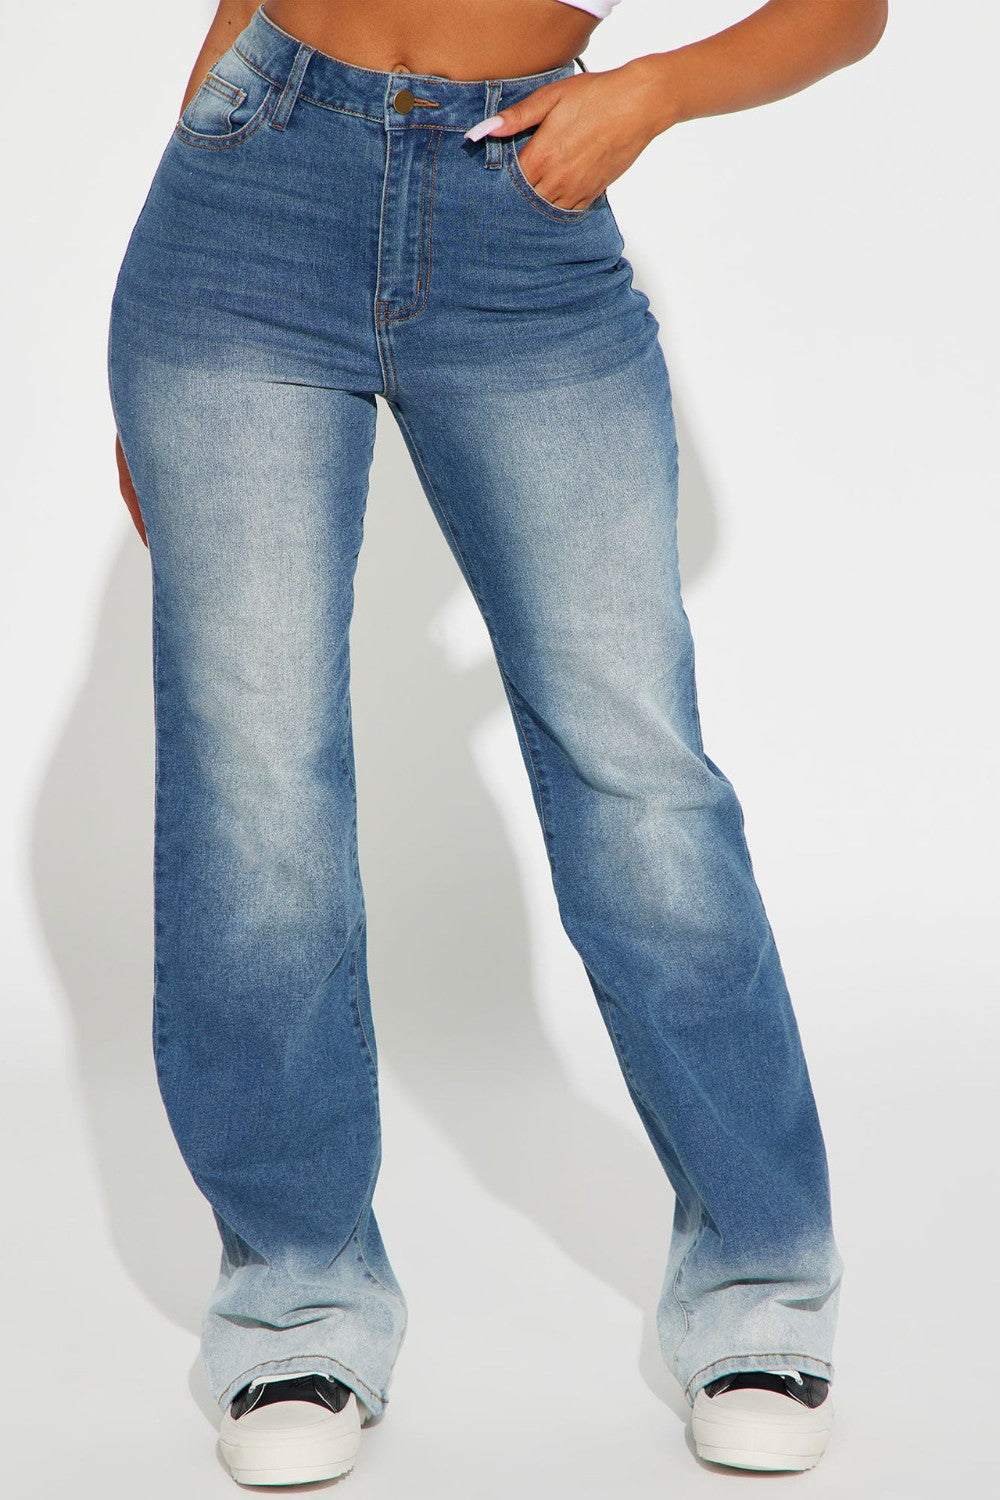 Pocketed Buttoned Straight Jeans Bottom wear